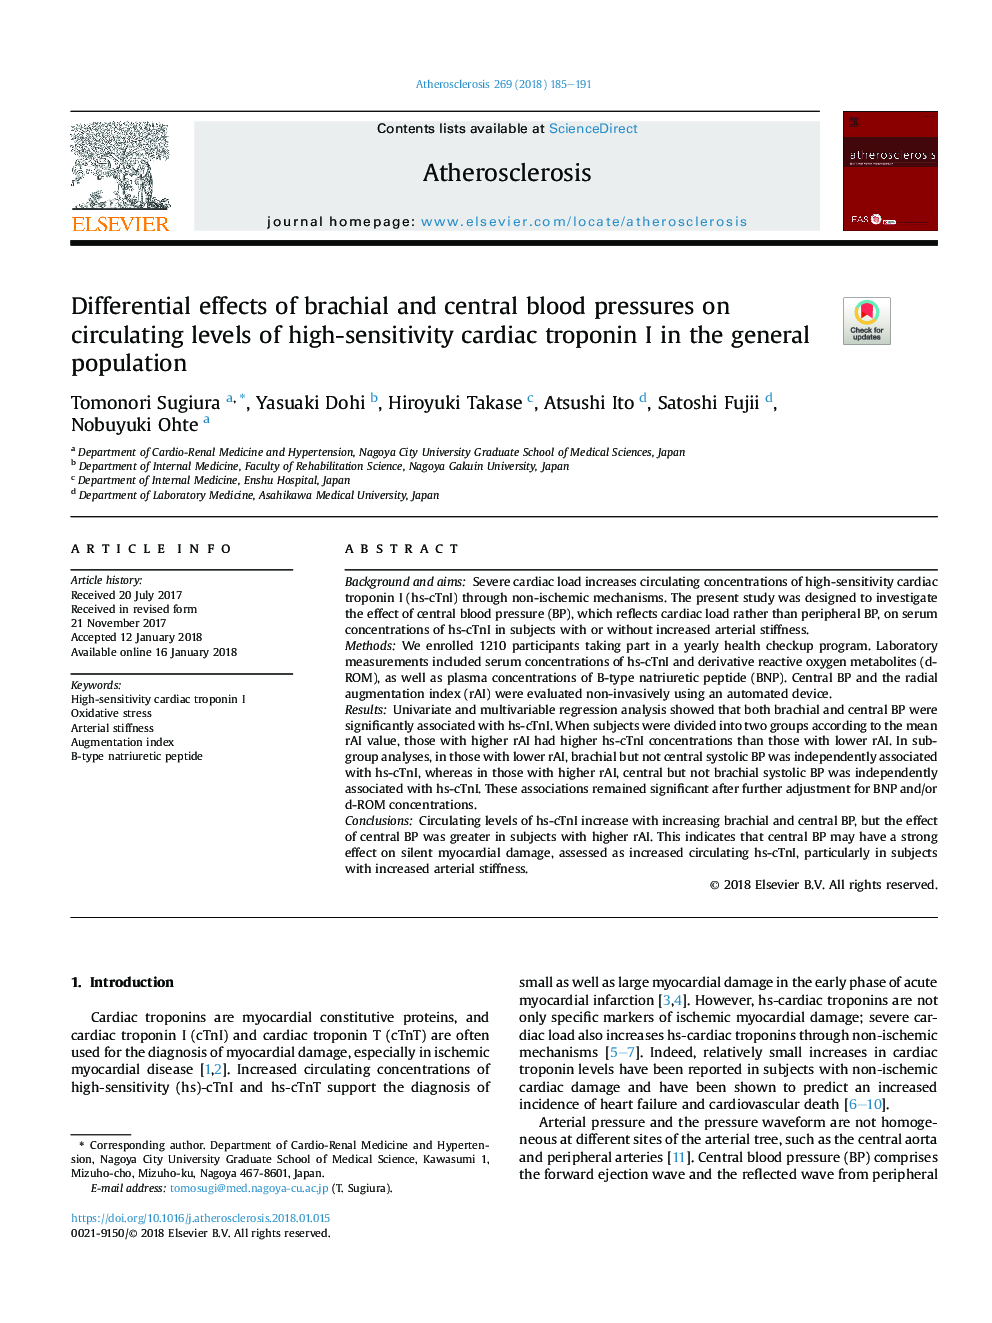 Differential effects of brachial and central blood pressures on circulating levels of high-sensitivity cardiac troponin I in the general population